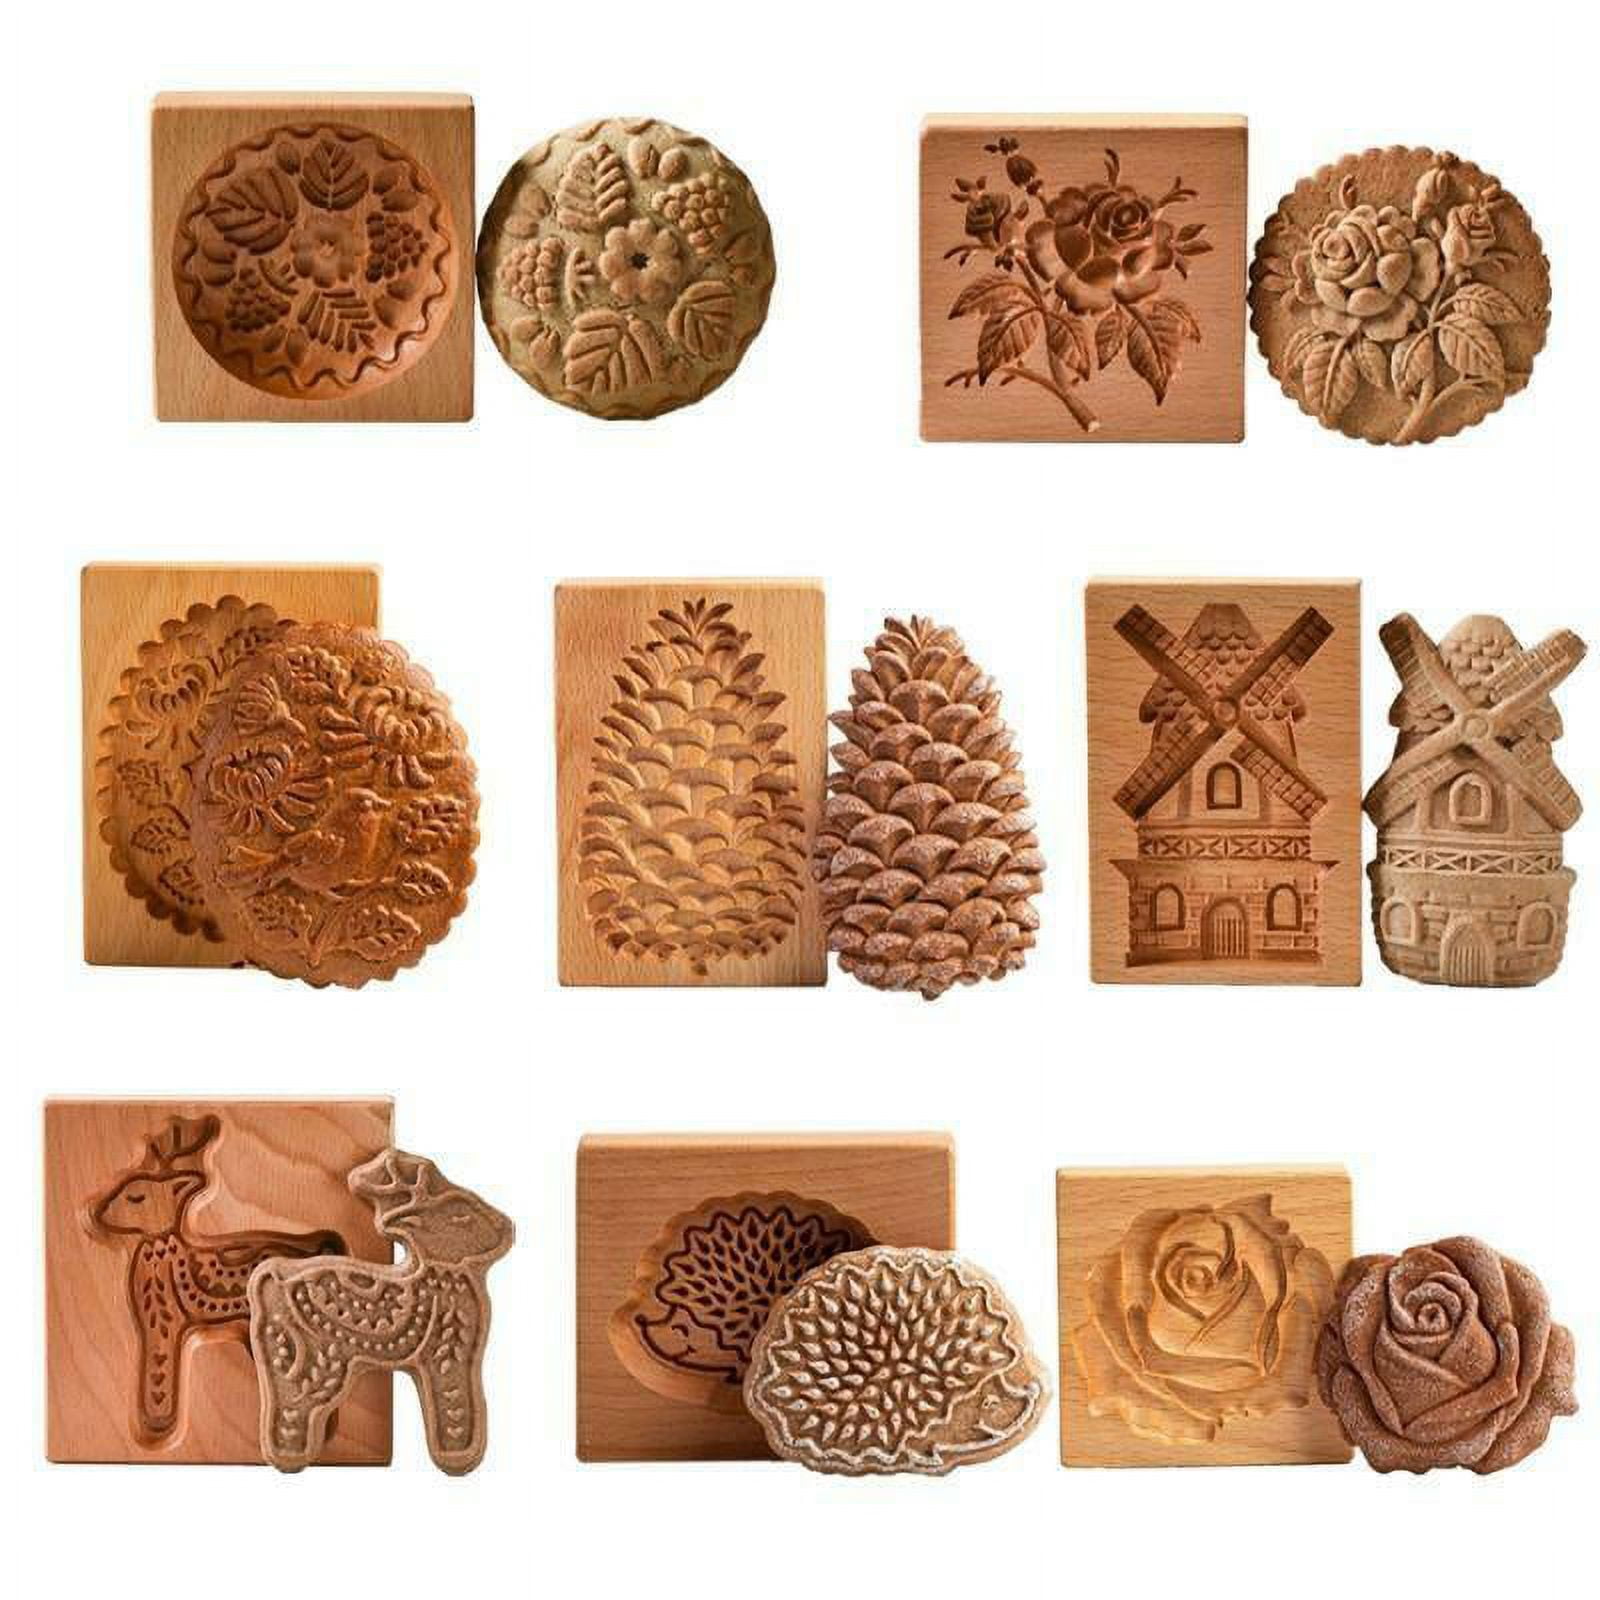 Raspberry Shortbread Mold, Carved Wood Gingerbread Cookie Biscuits Shortbread  Mold, Wooden Cookie Mold With Good Wishes, Cookie Stamp Embossing Mould